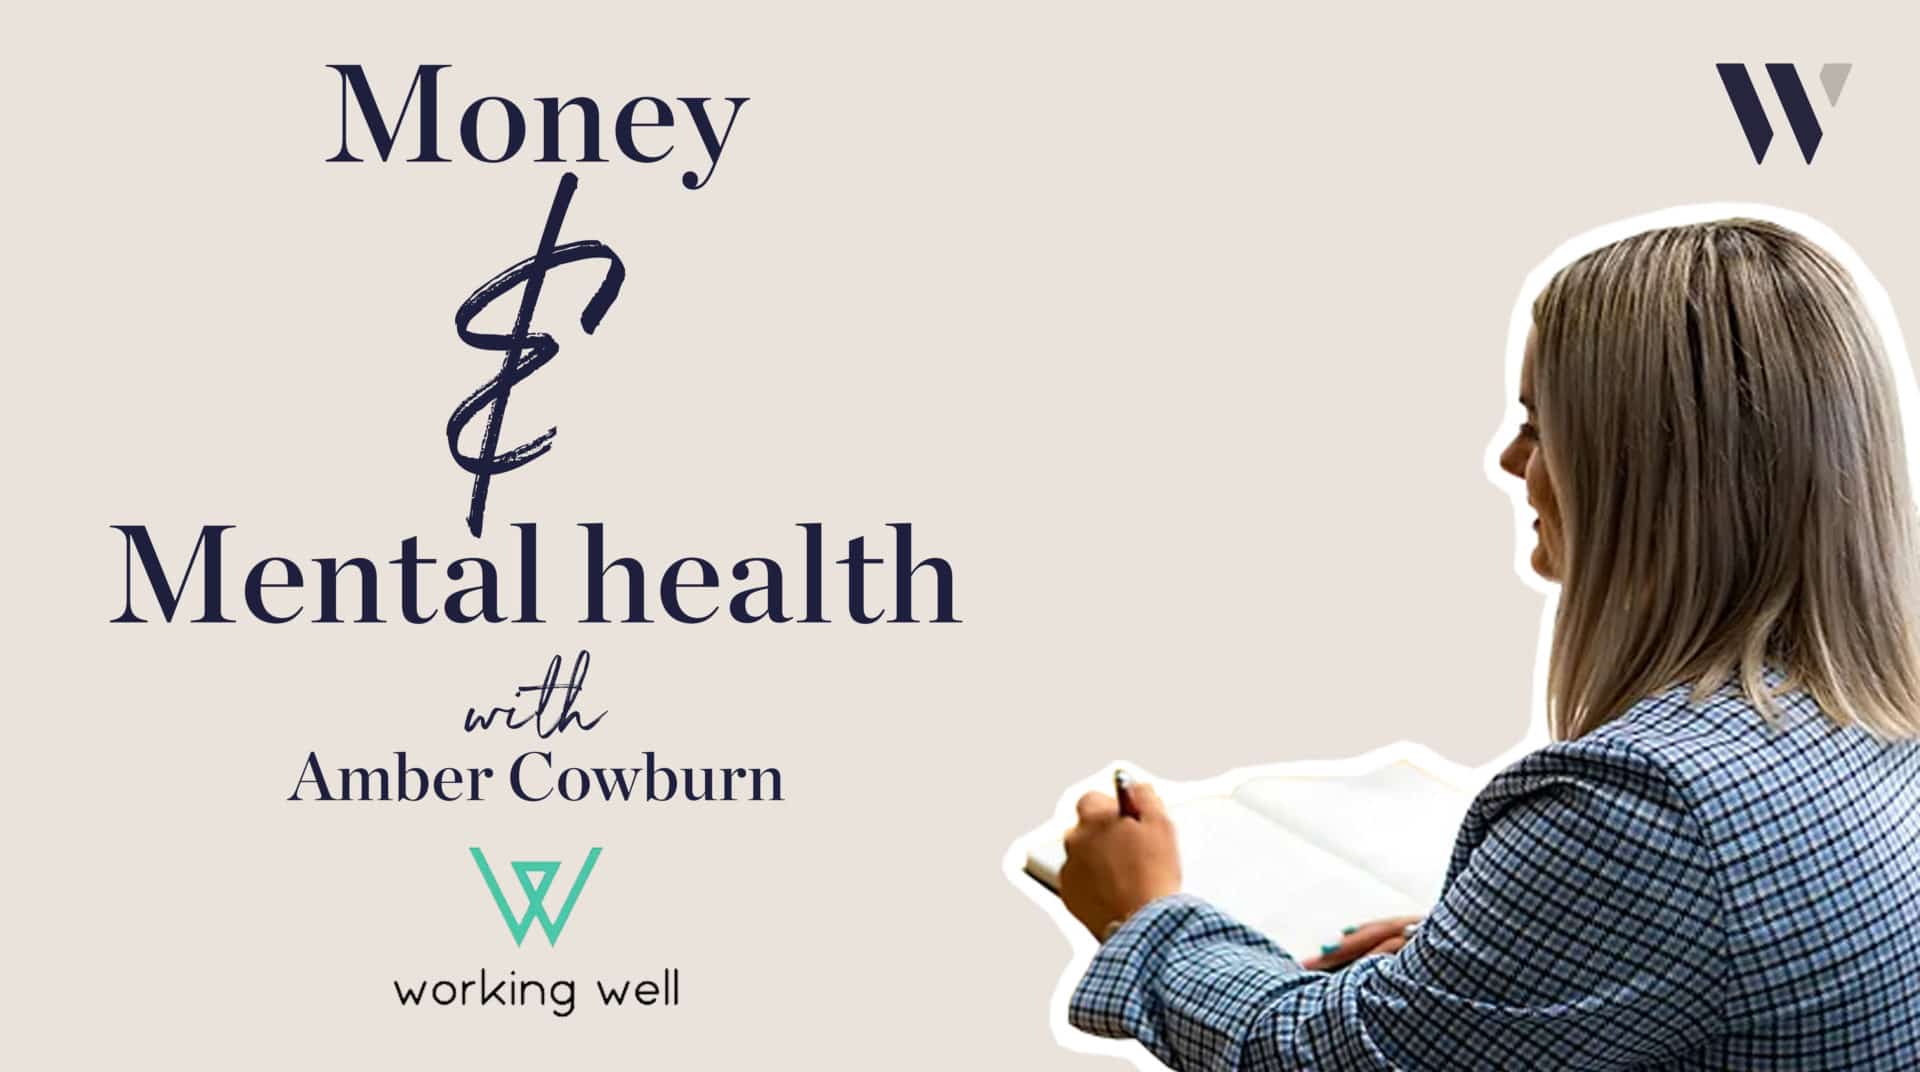 Financial Wellbeing and Mental Health